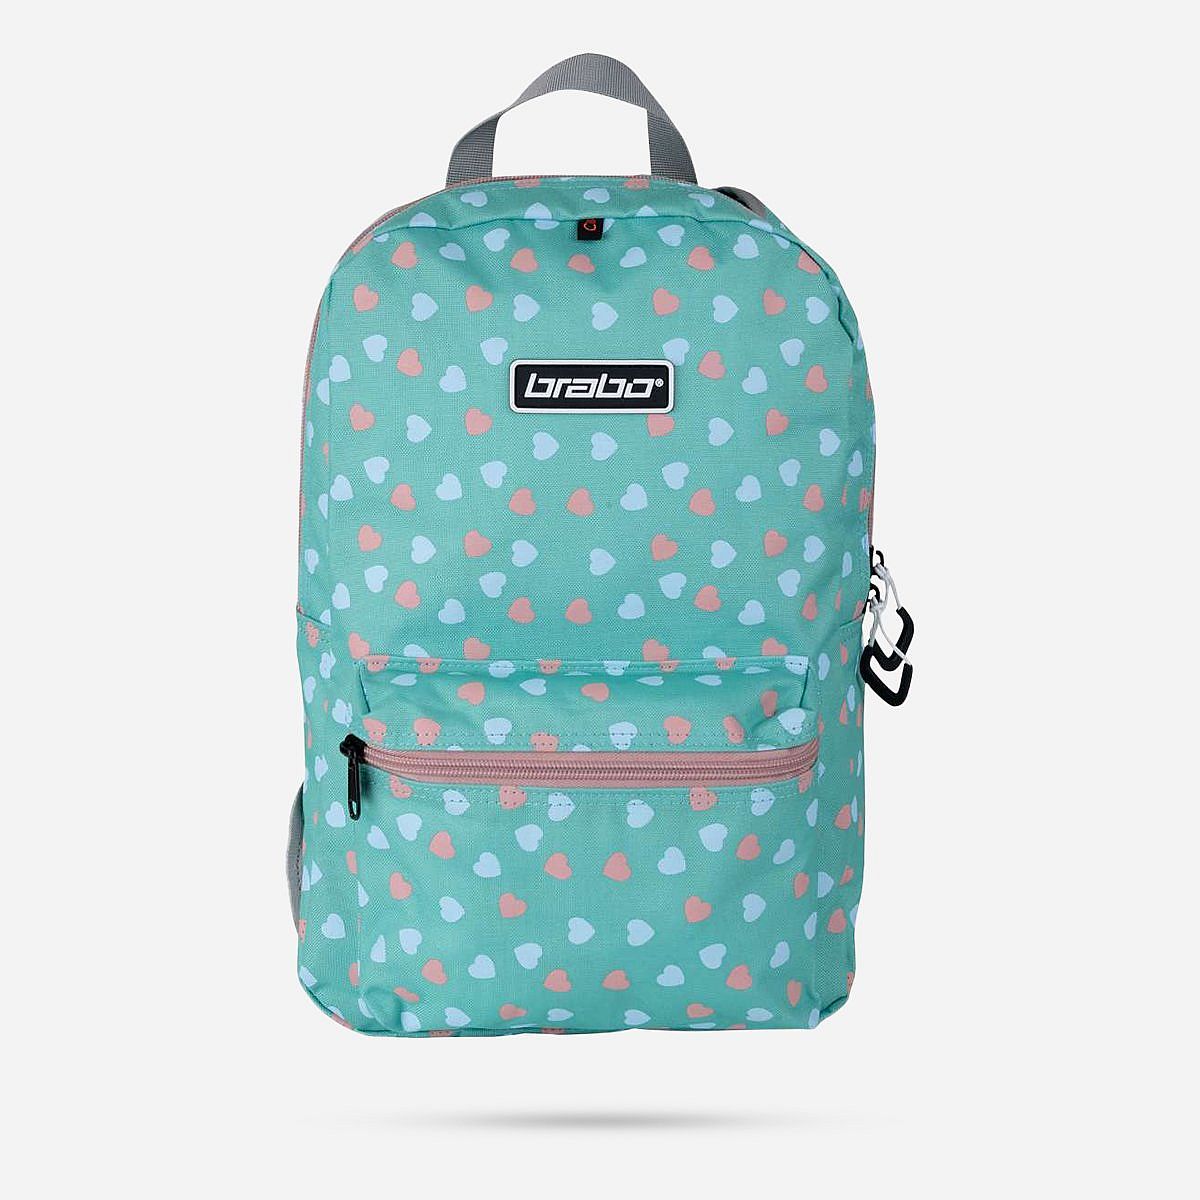 AN303101 5200 Backpack Storm Hearts Turq/p